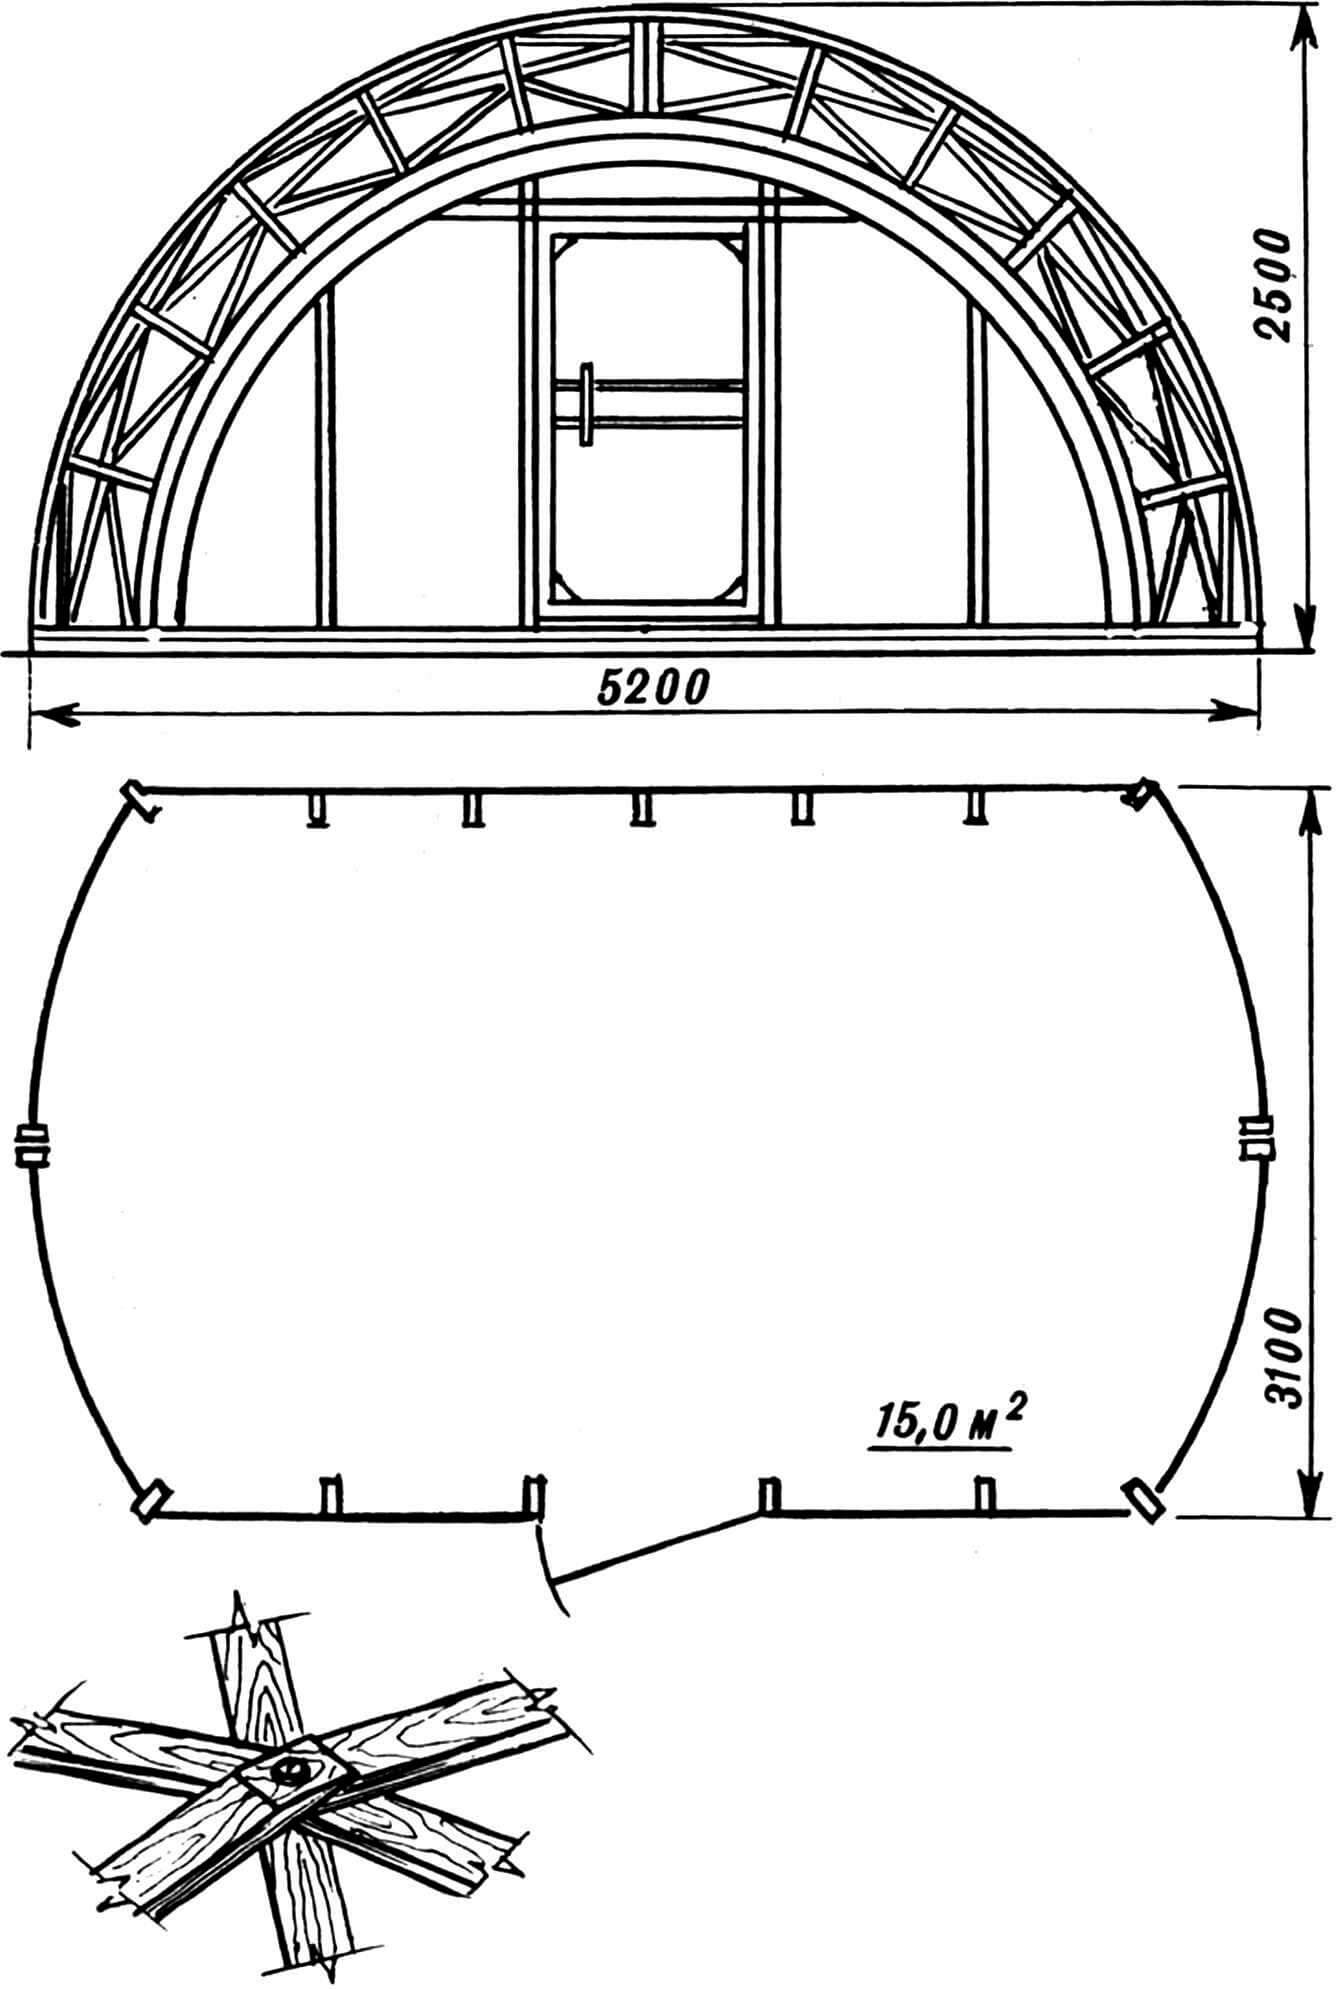 Facade and plan of the arched frame. Below is a typical connection of frame rods.